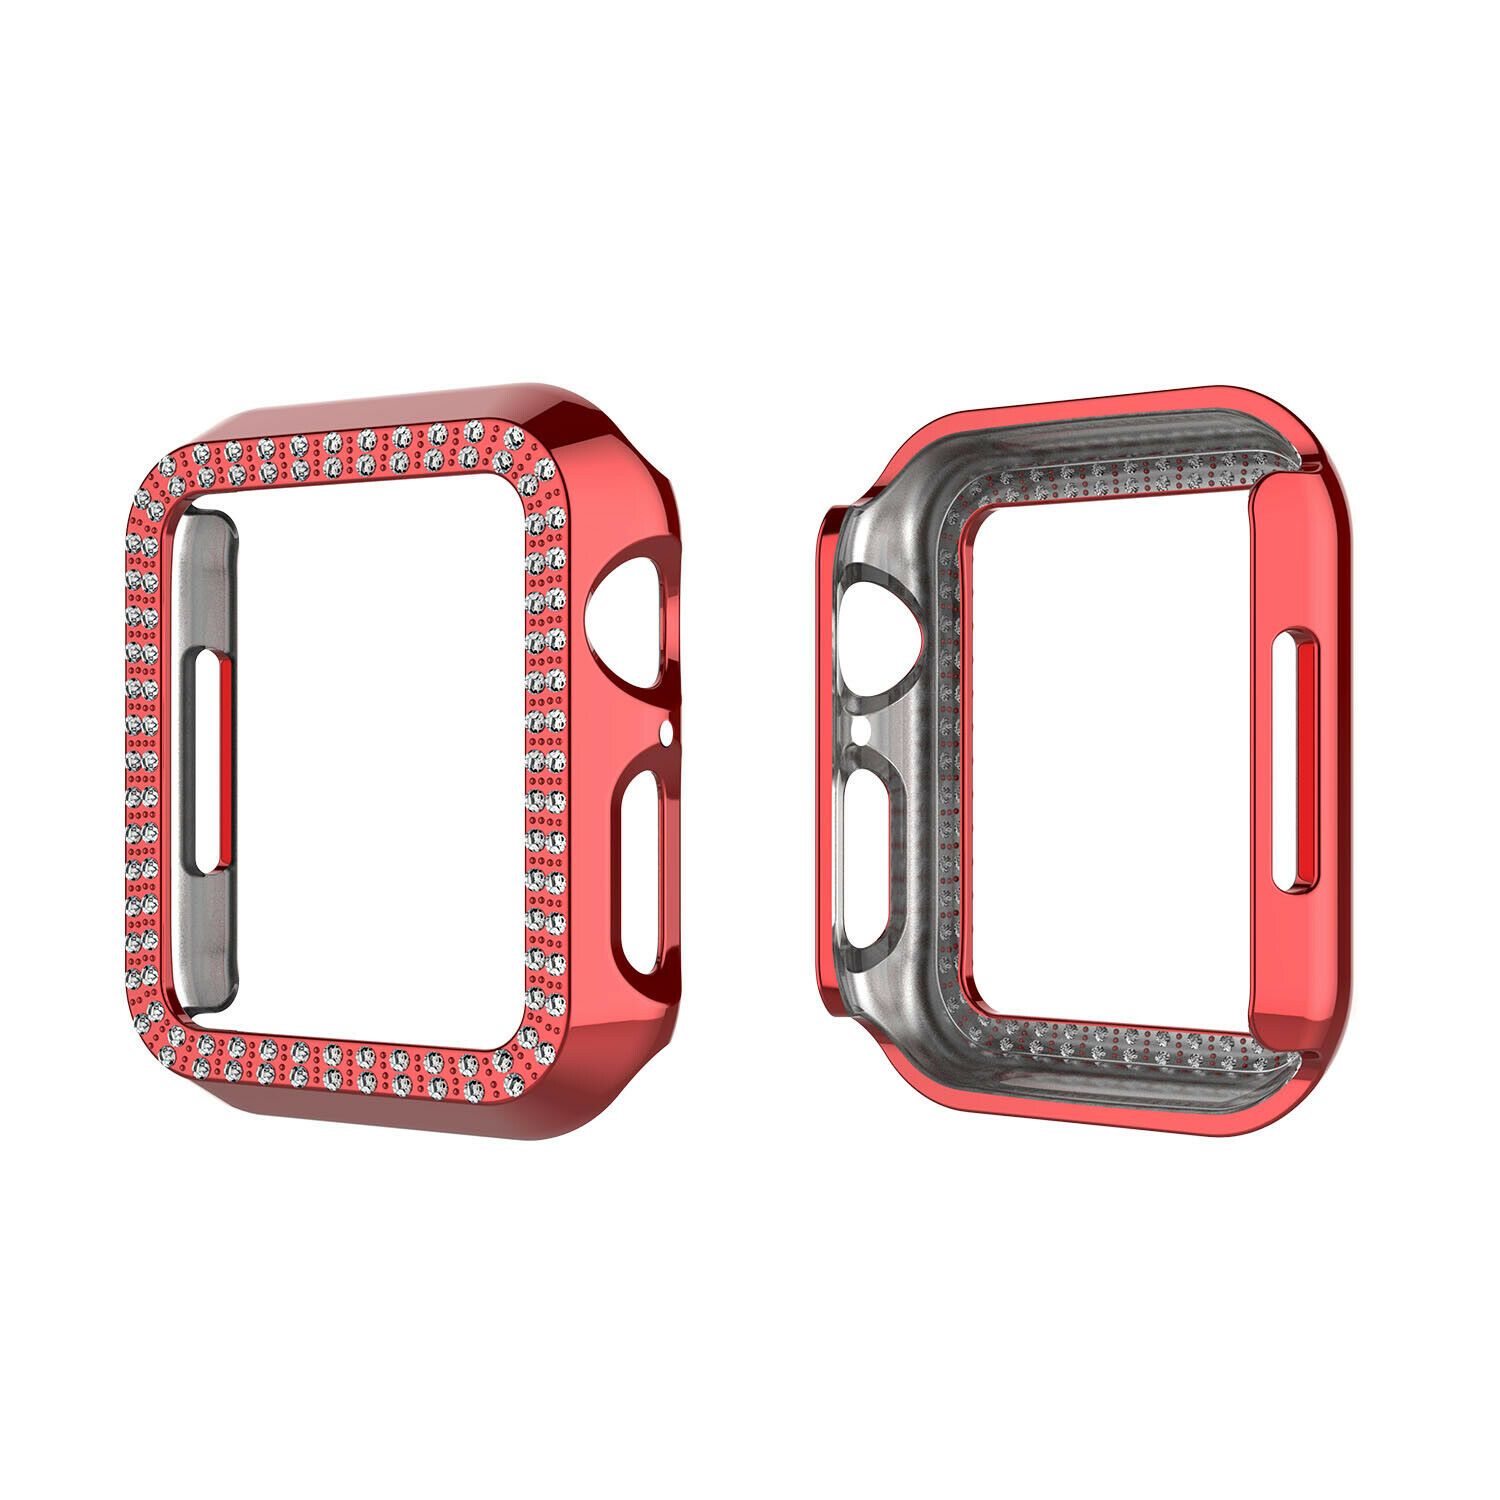 Crystal Diamond Protector Case Cover for Apple Watch 38/40/42/44 mm Series 5/4/3 ebizware 